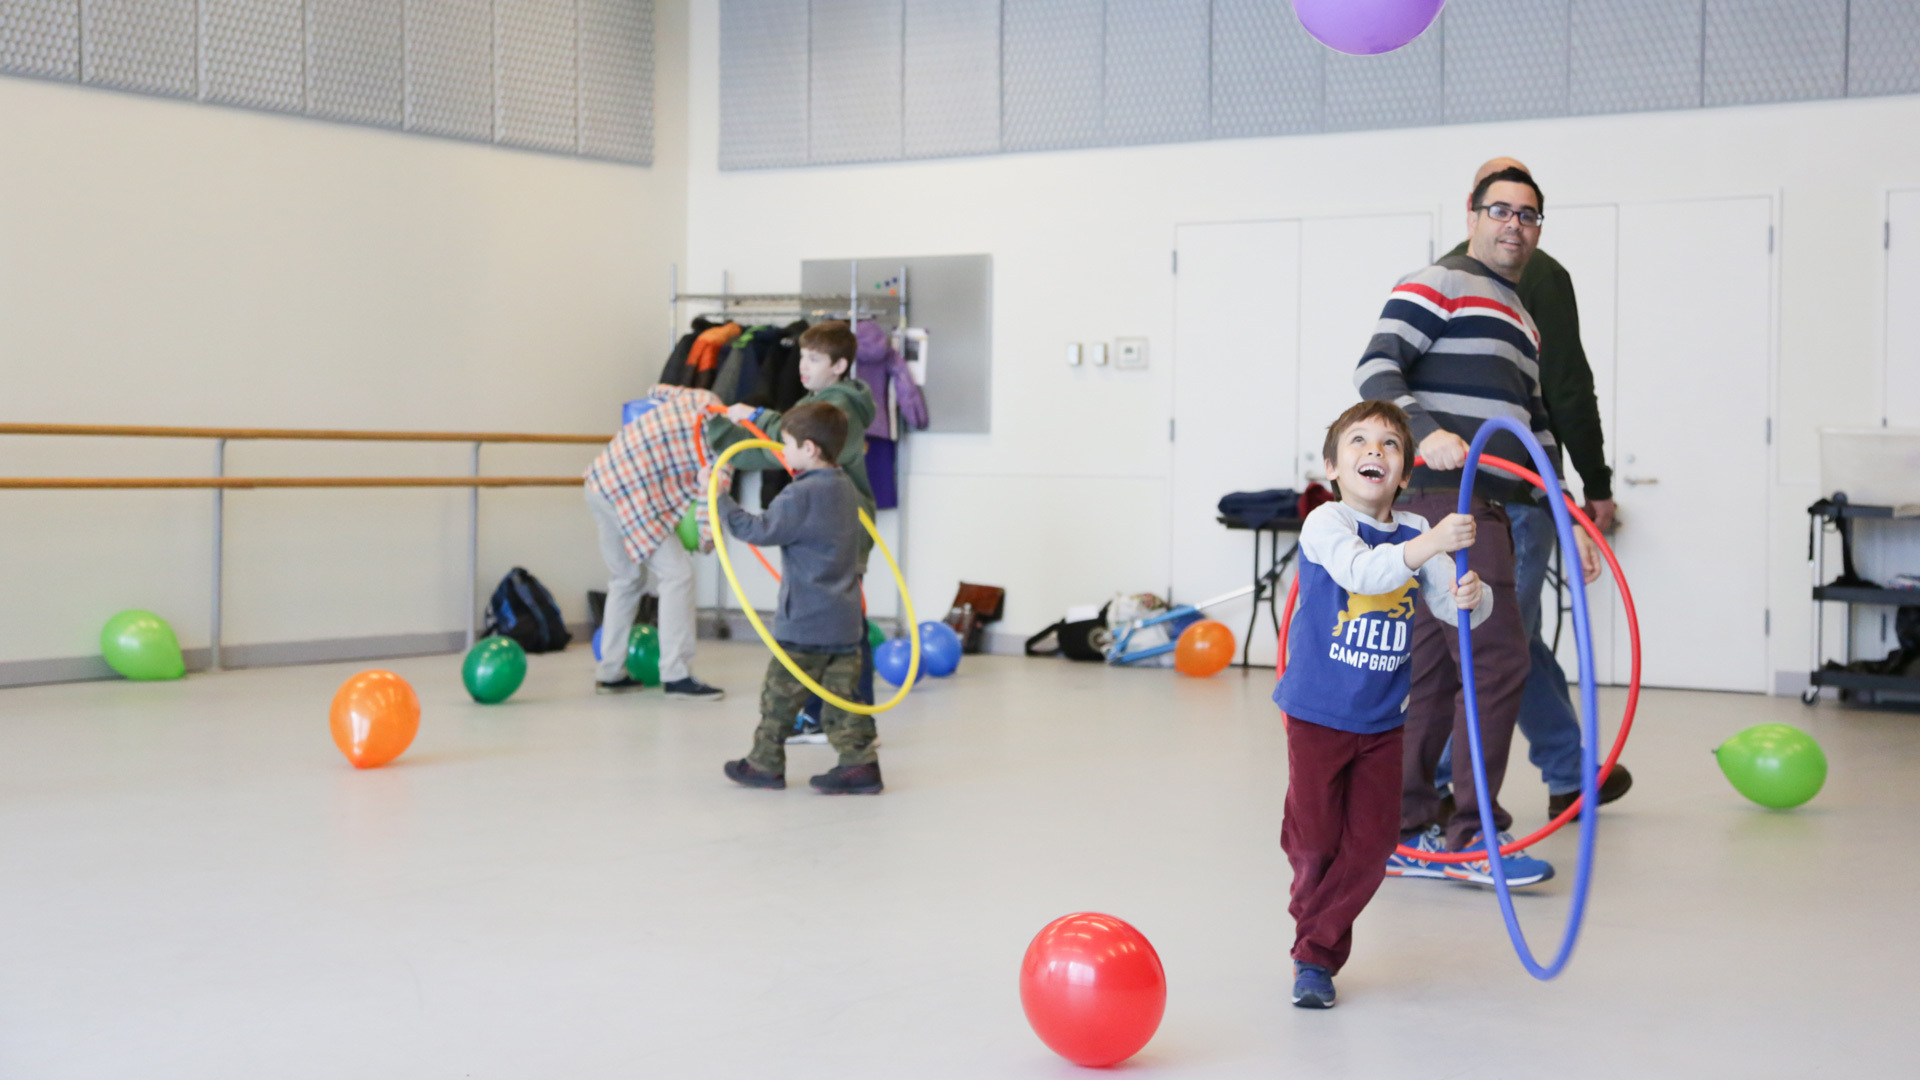 A group of people of varying ages in a room play with multi-colored balloons and hula hoops.